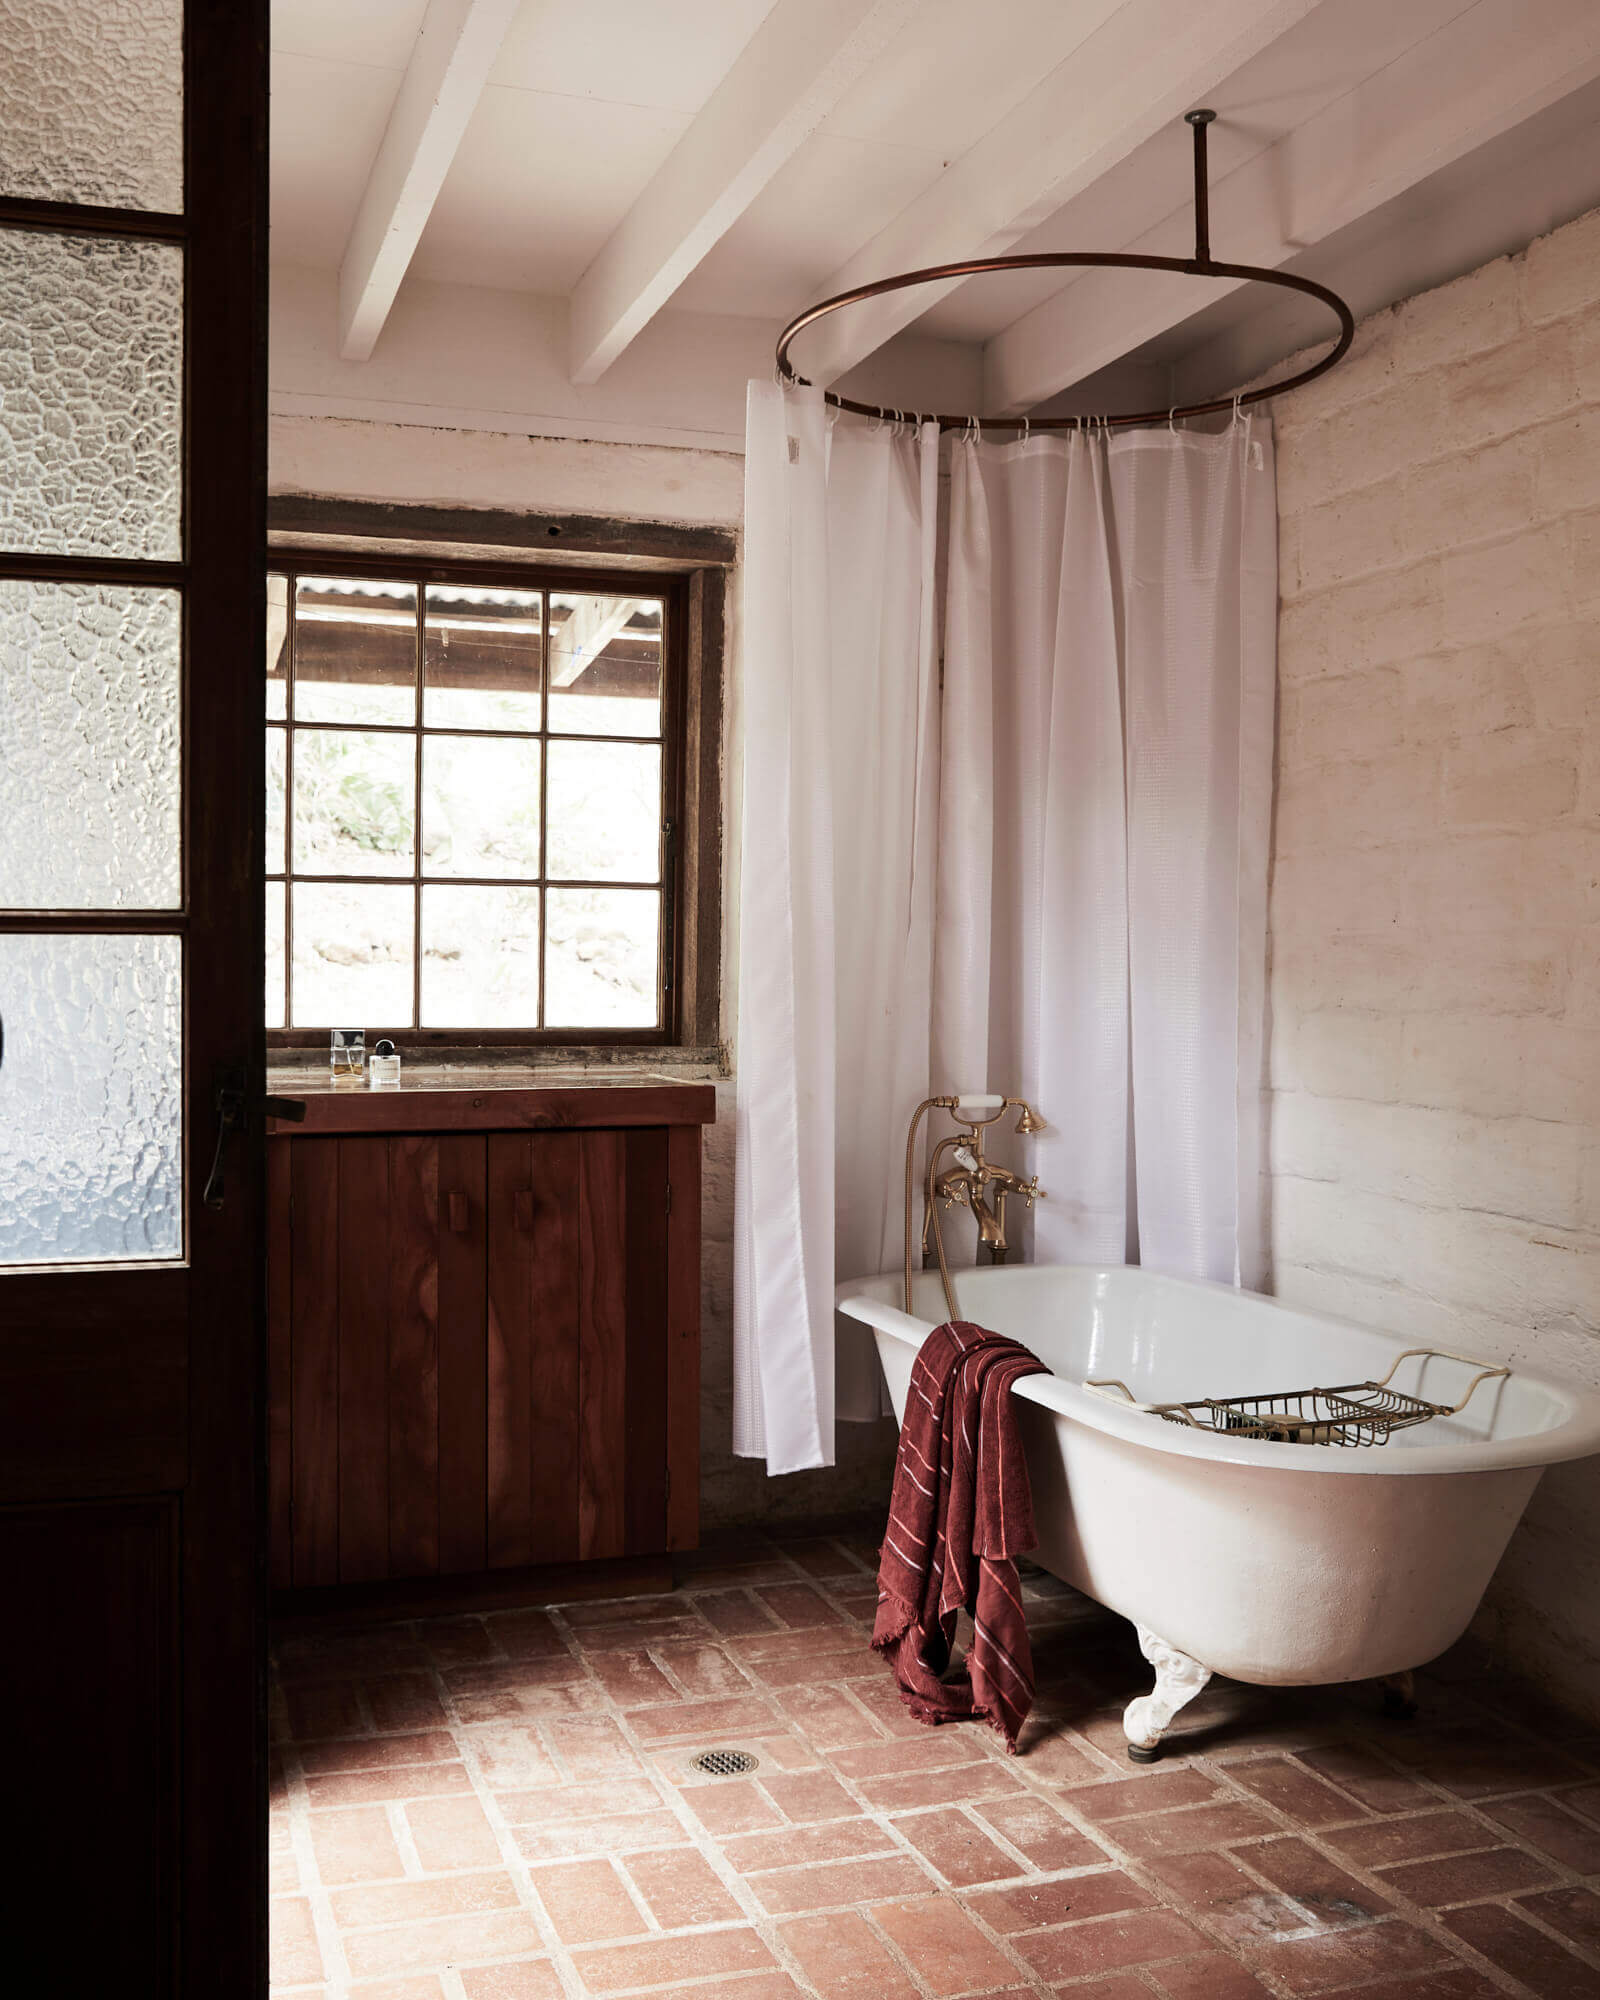 Bathroom at The Perch, Byron Beach Abodes with original claw-foot bath, timber doors and windows with mottled glass and round shower curtain rail